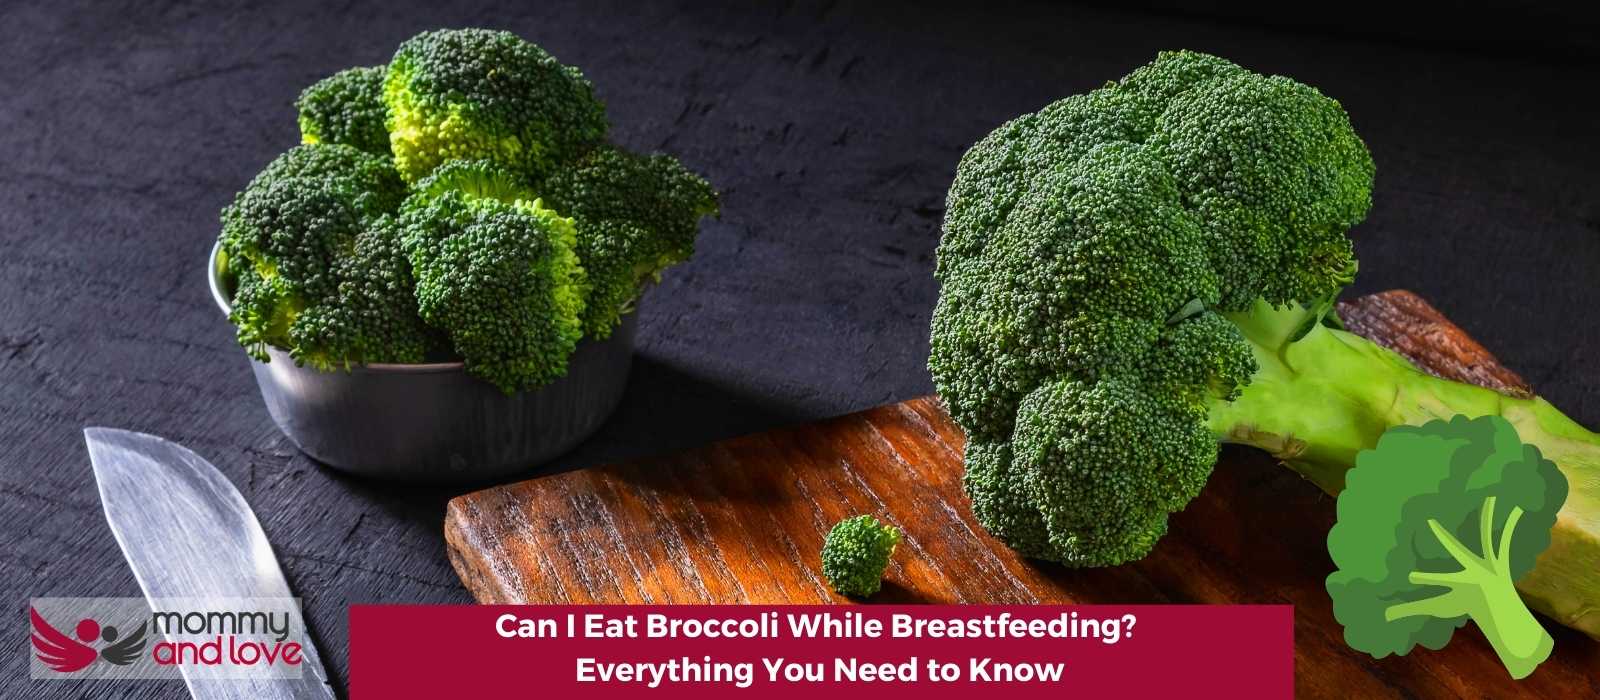 Can I Eat Broccoli While Breastfeeding? Everything You Need to Know